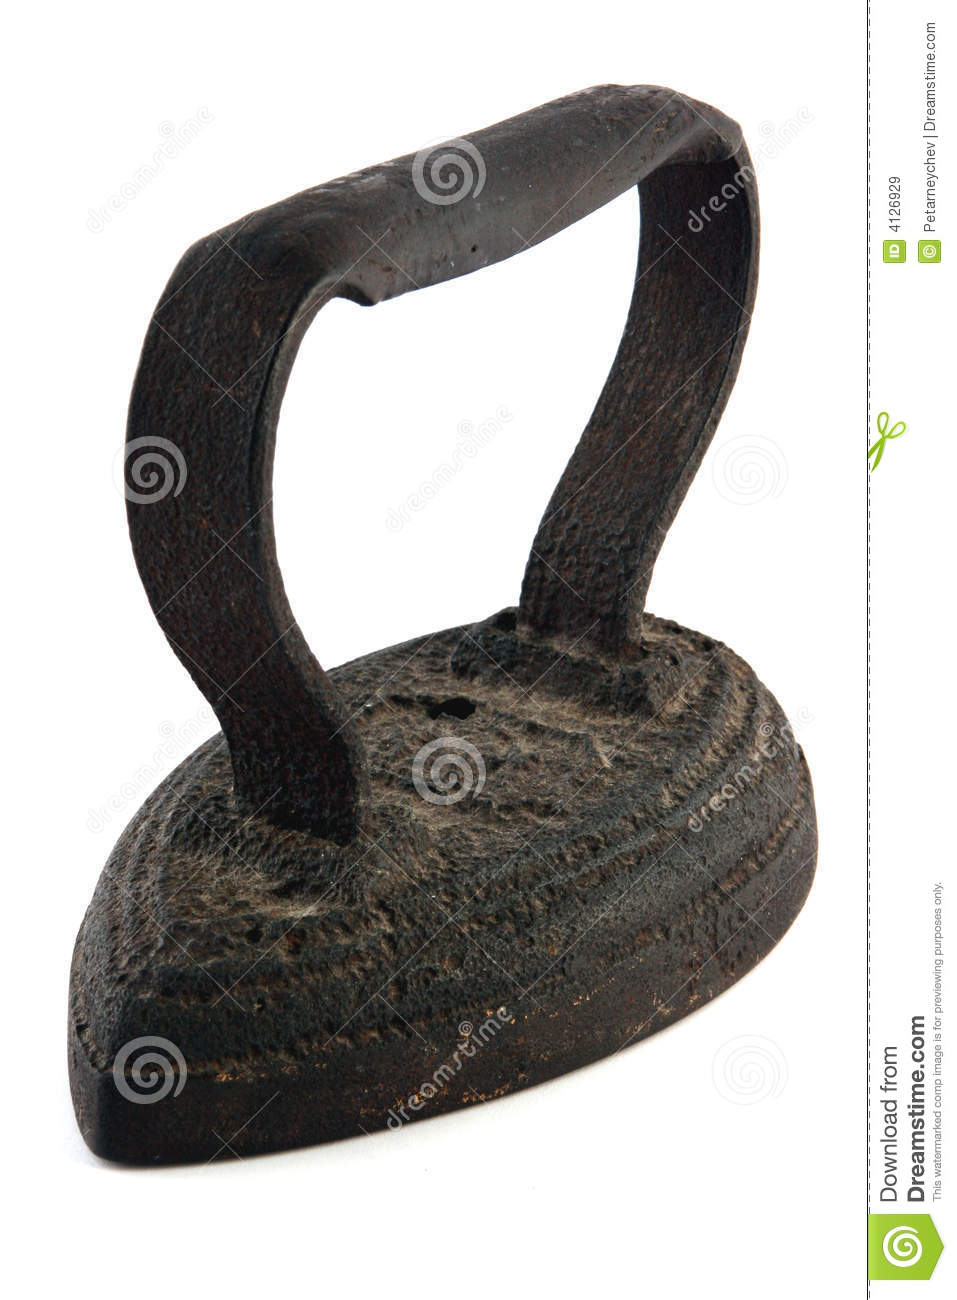 An Antique Iron Royalty Free Stock Images   Image  4126929